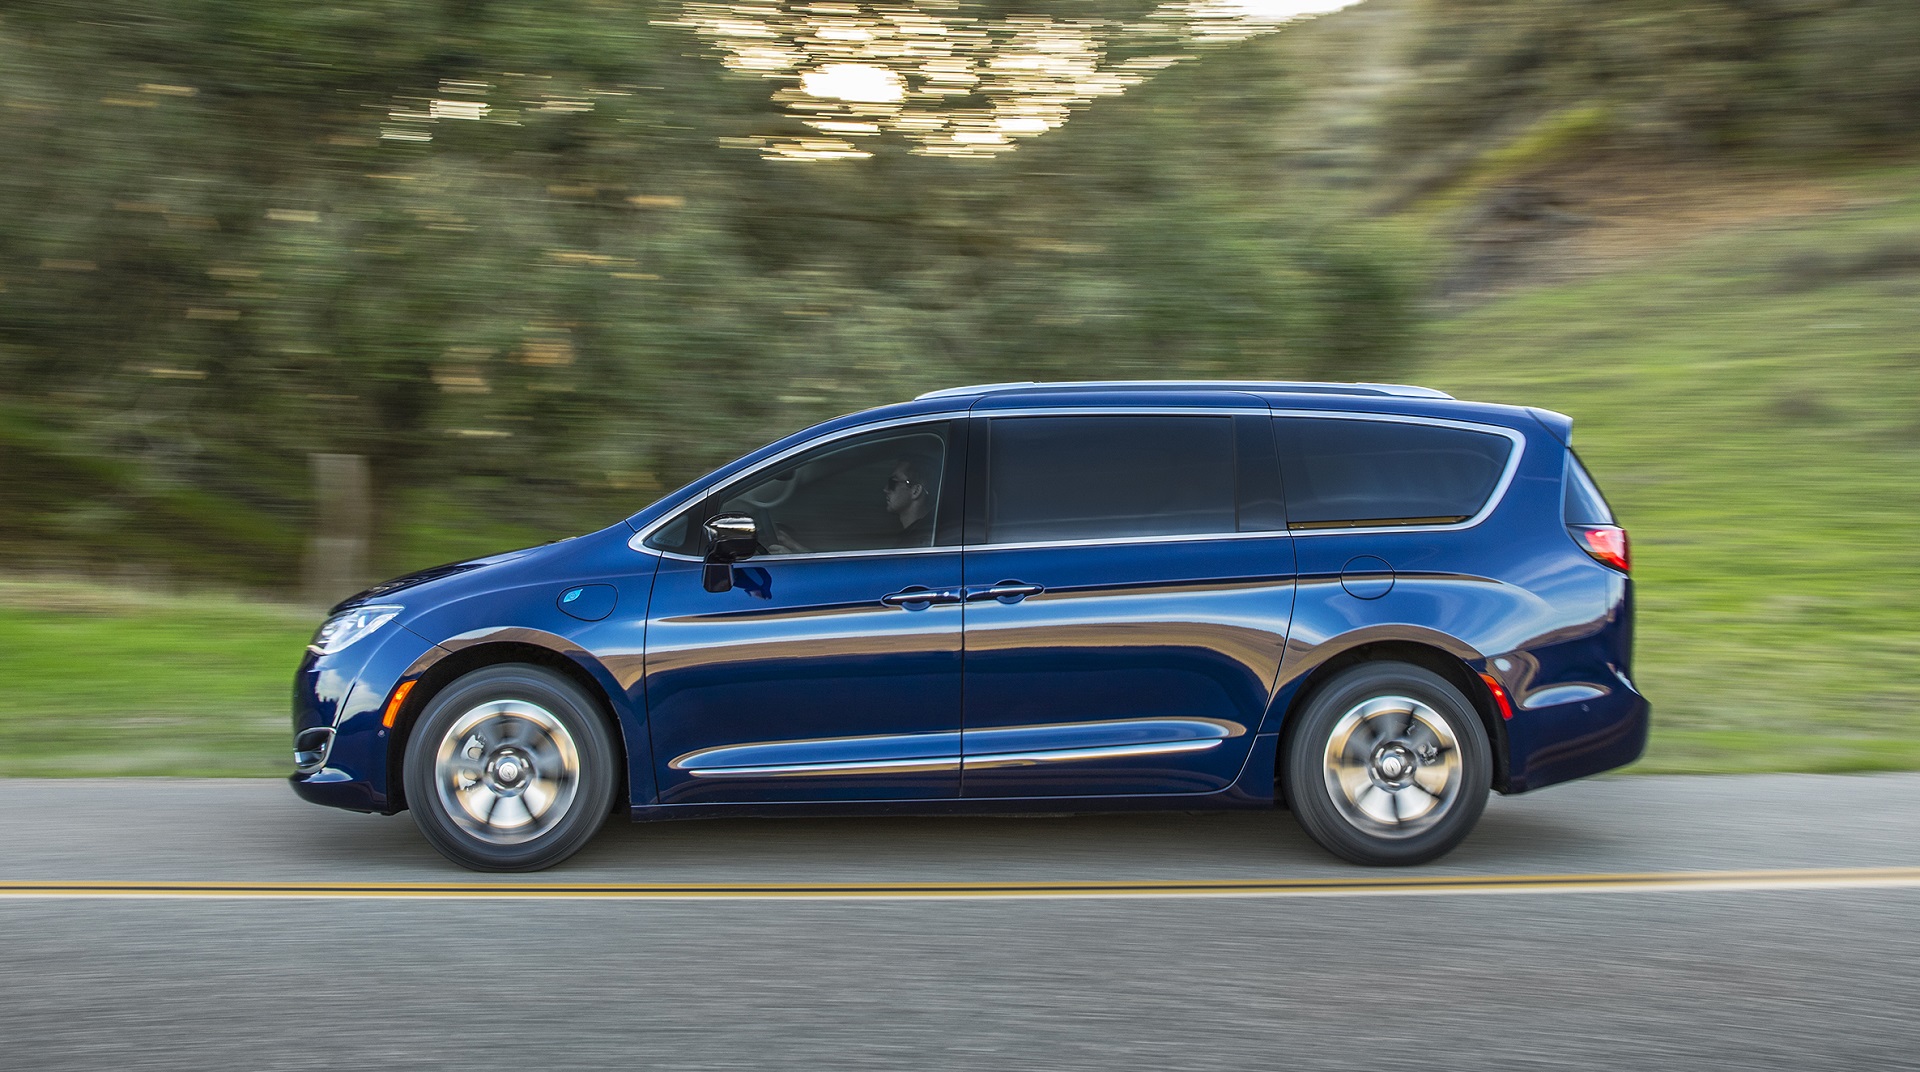 2018 Chrysler Pacifica Hybrid Review, Ratings, Specs ...